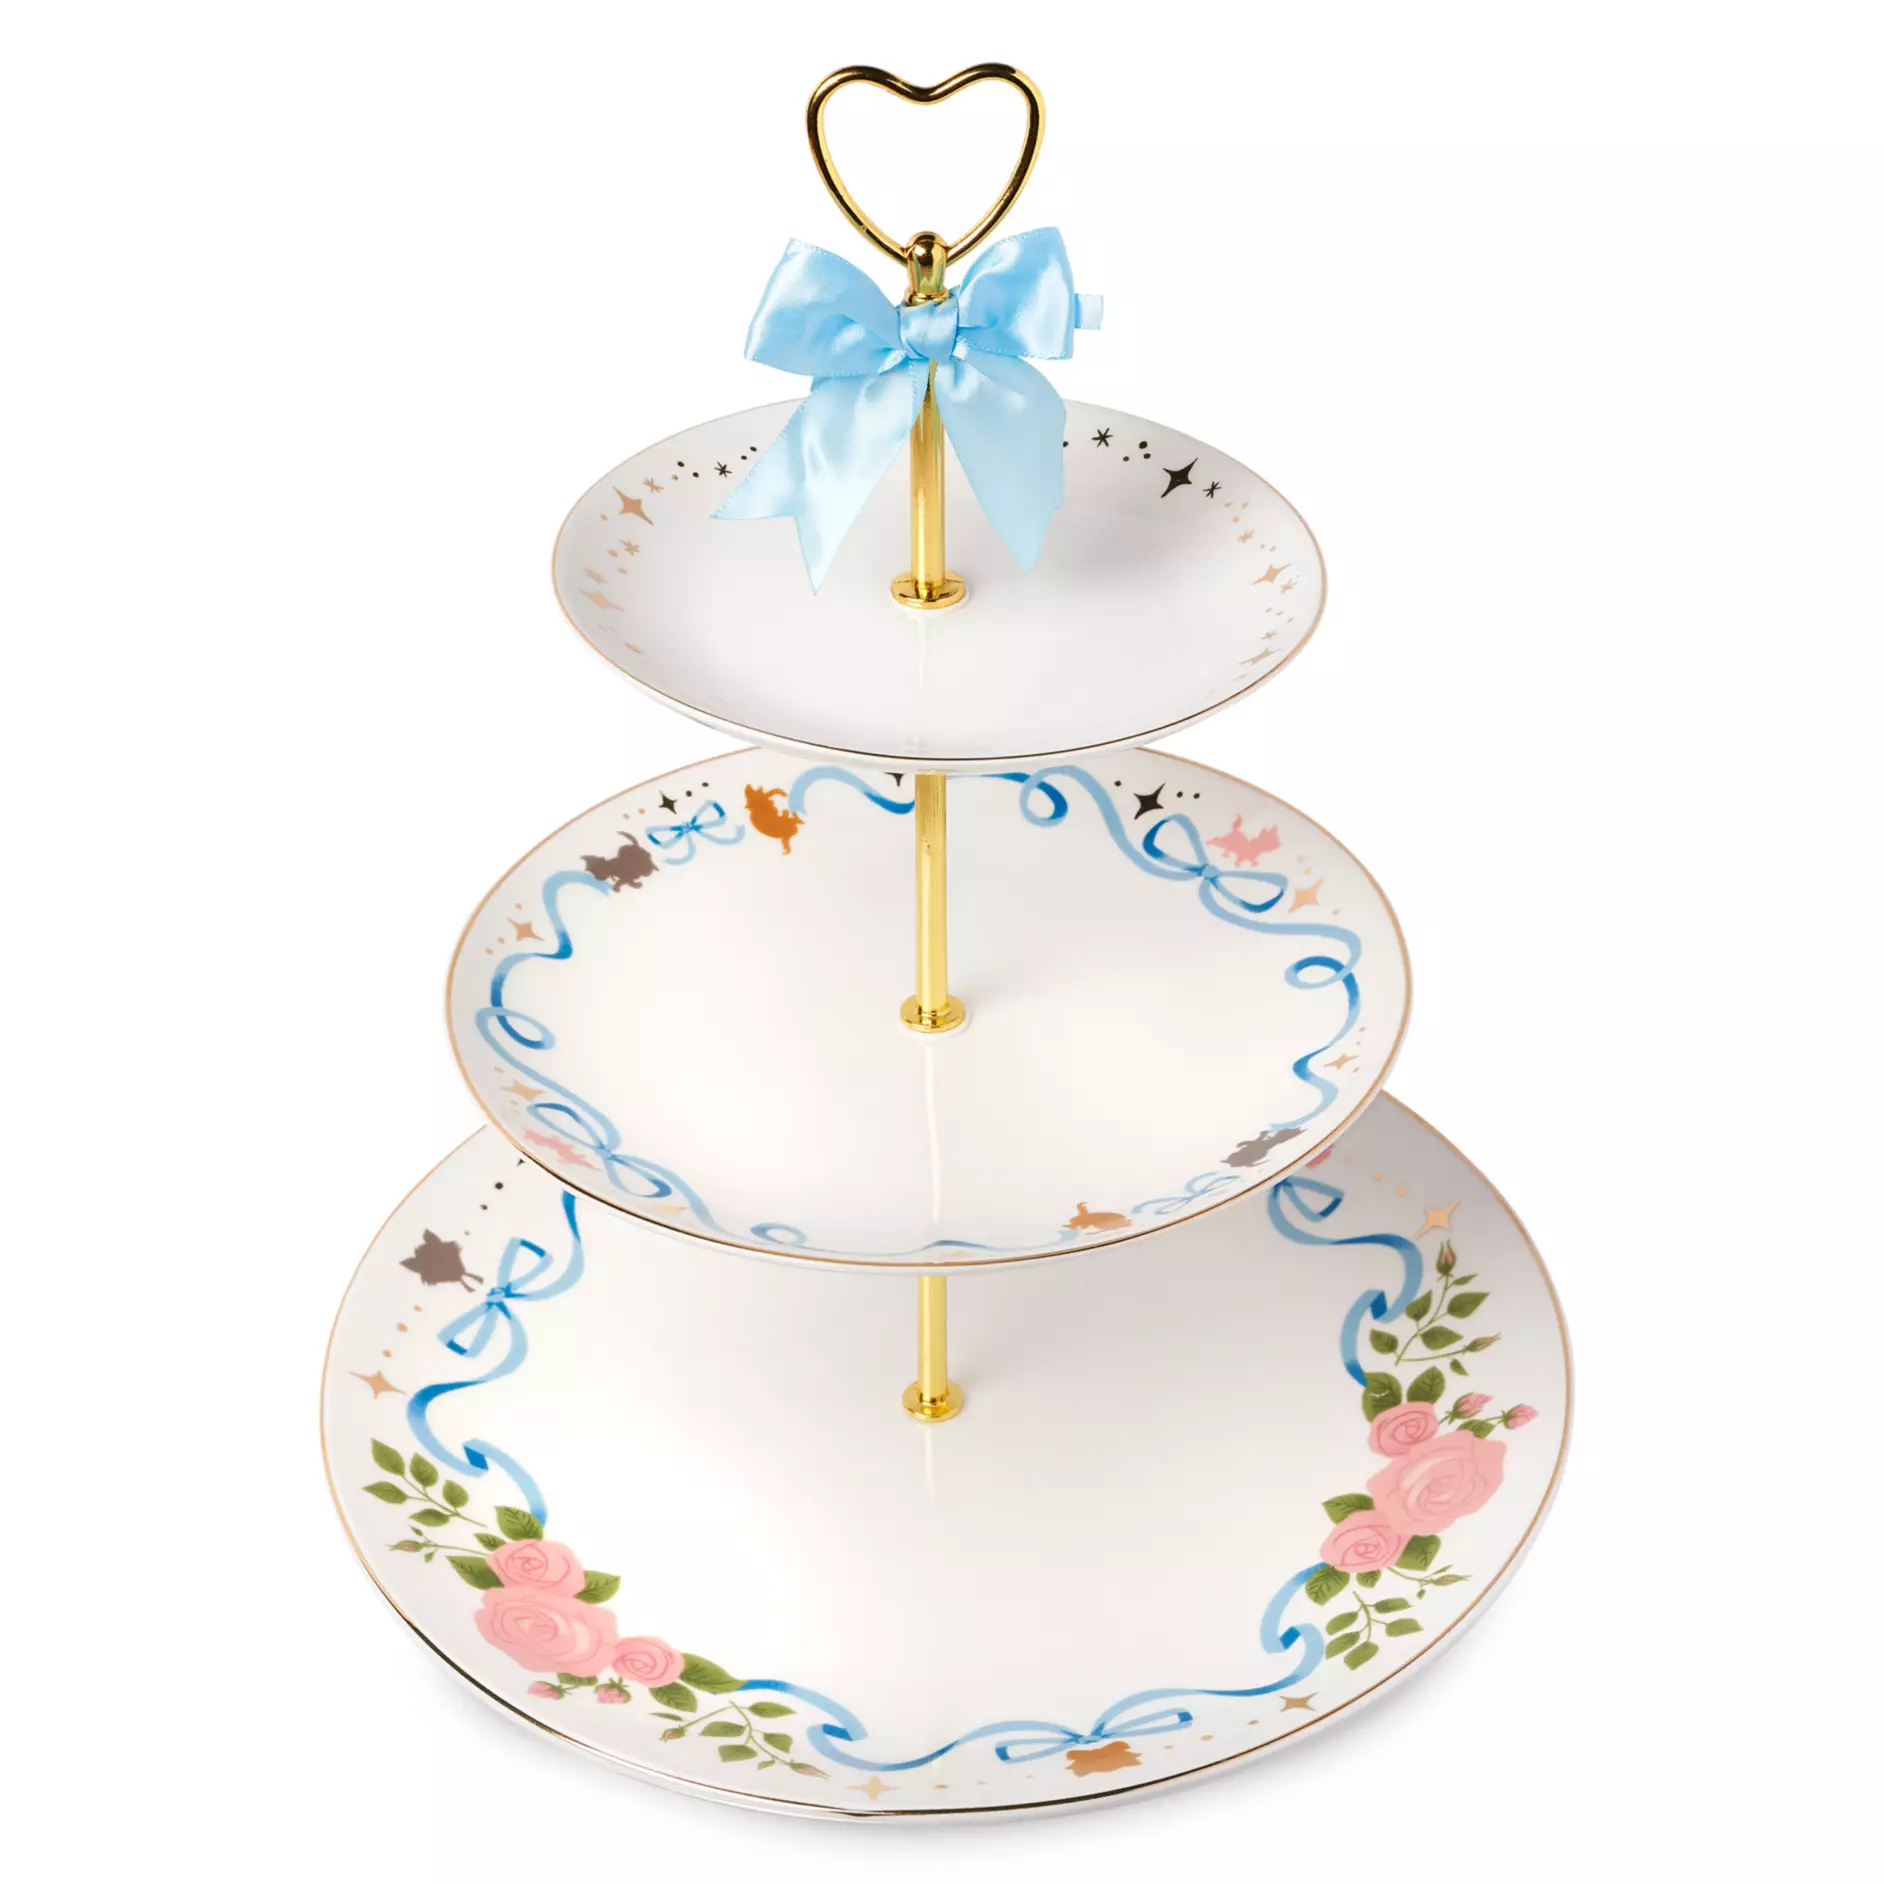 The Aristocats Tiered Tray by Ann Shen Official shopDisney